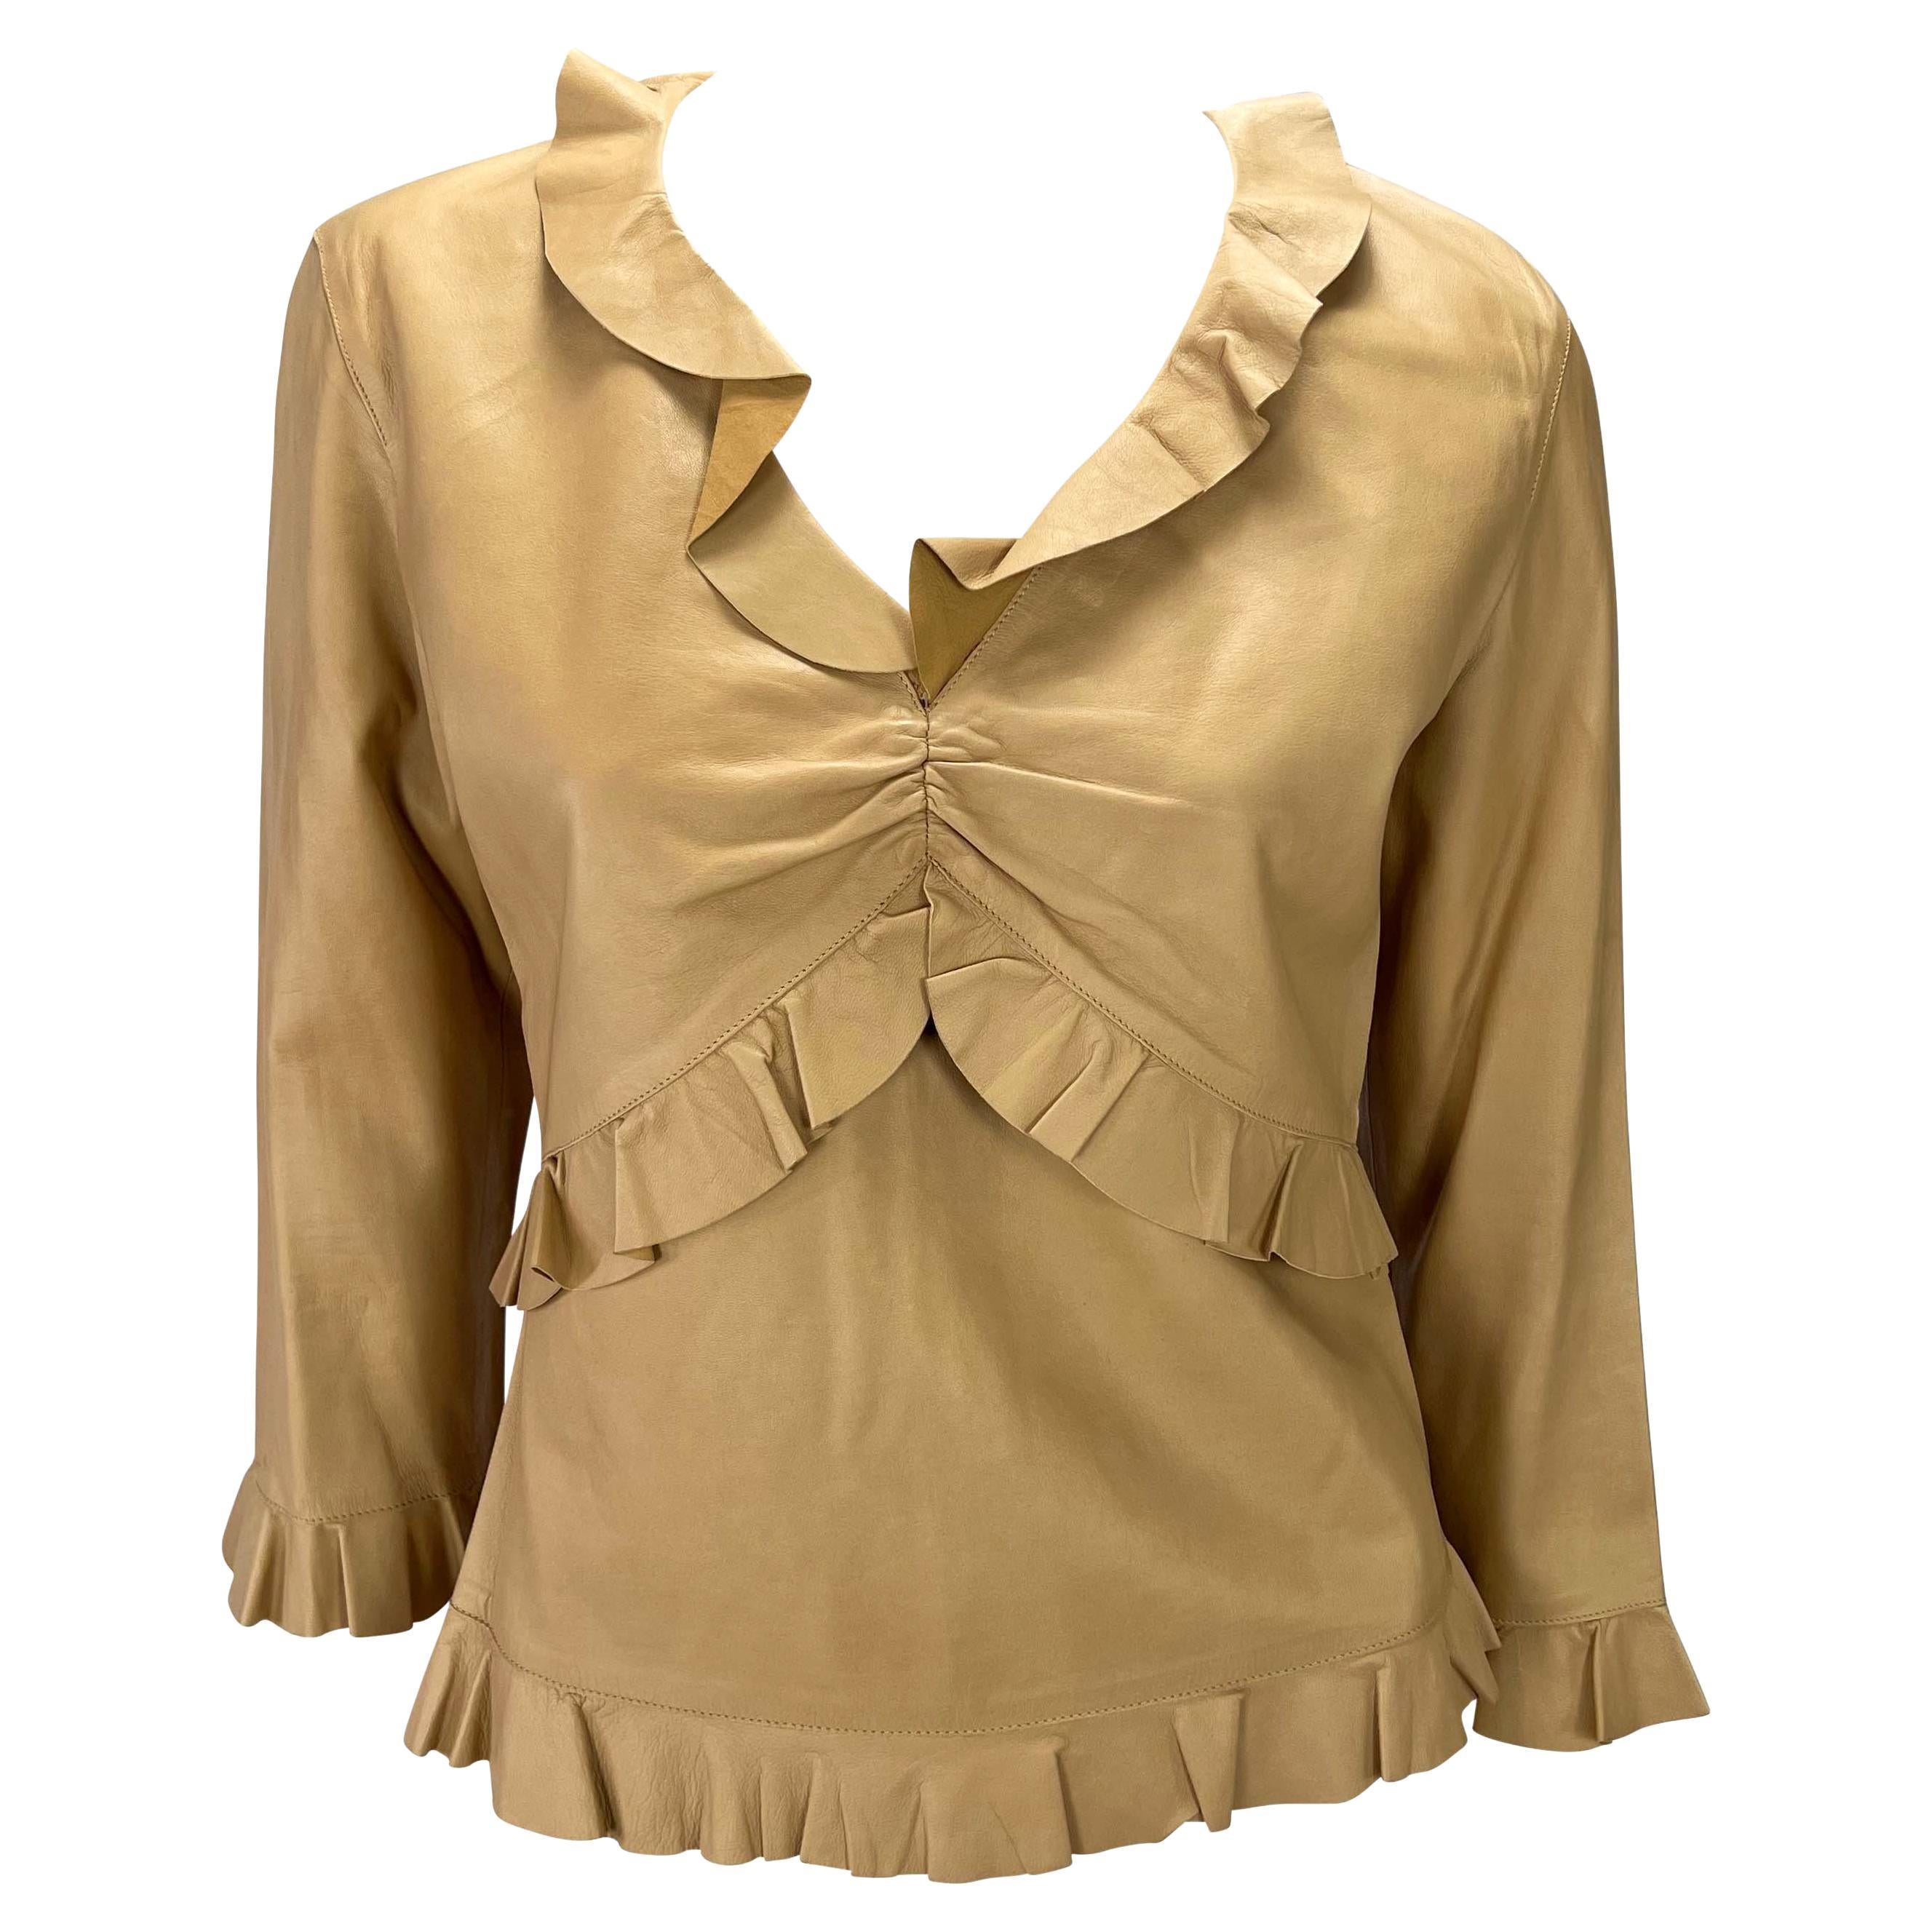 S/S 1999 Gucci by Tom Ford Saddle Brown Ruffle Leather V-Neck Blouse For Sale